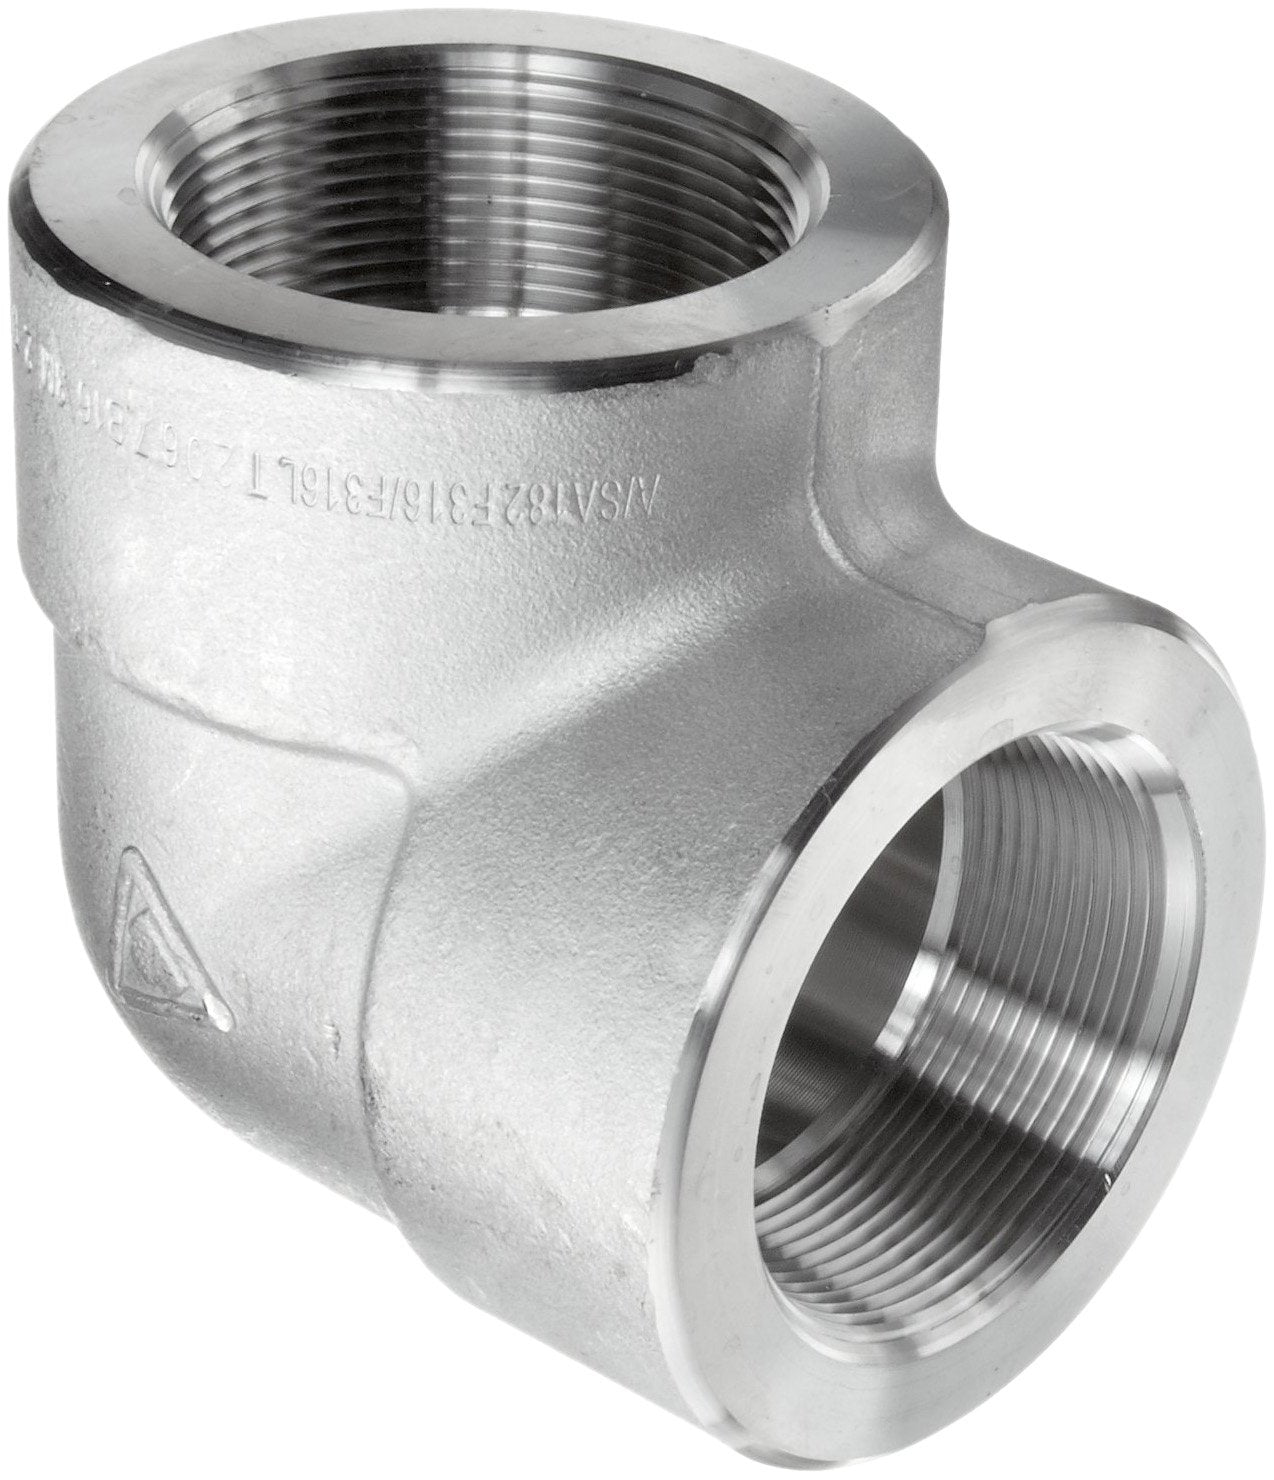 3601D-12 - 3/4" Threaded 90 Degree Elbow, 316/316L Stainless Steel